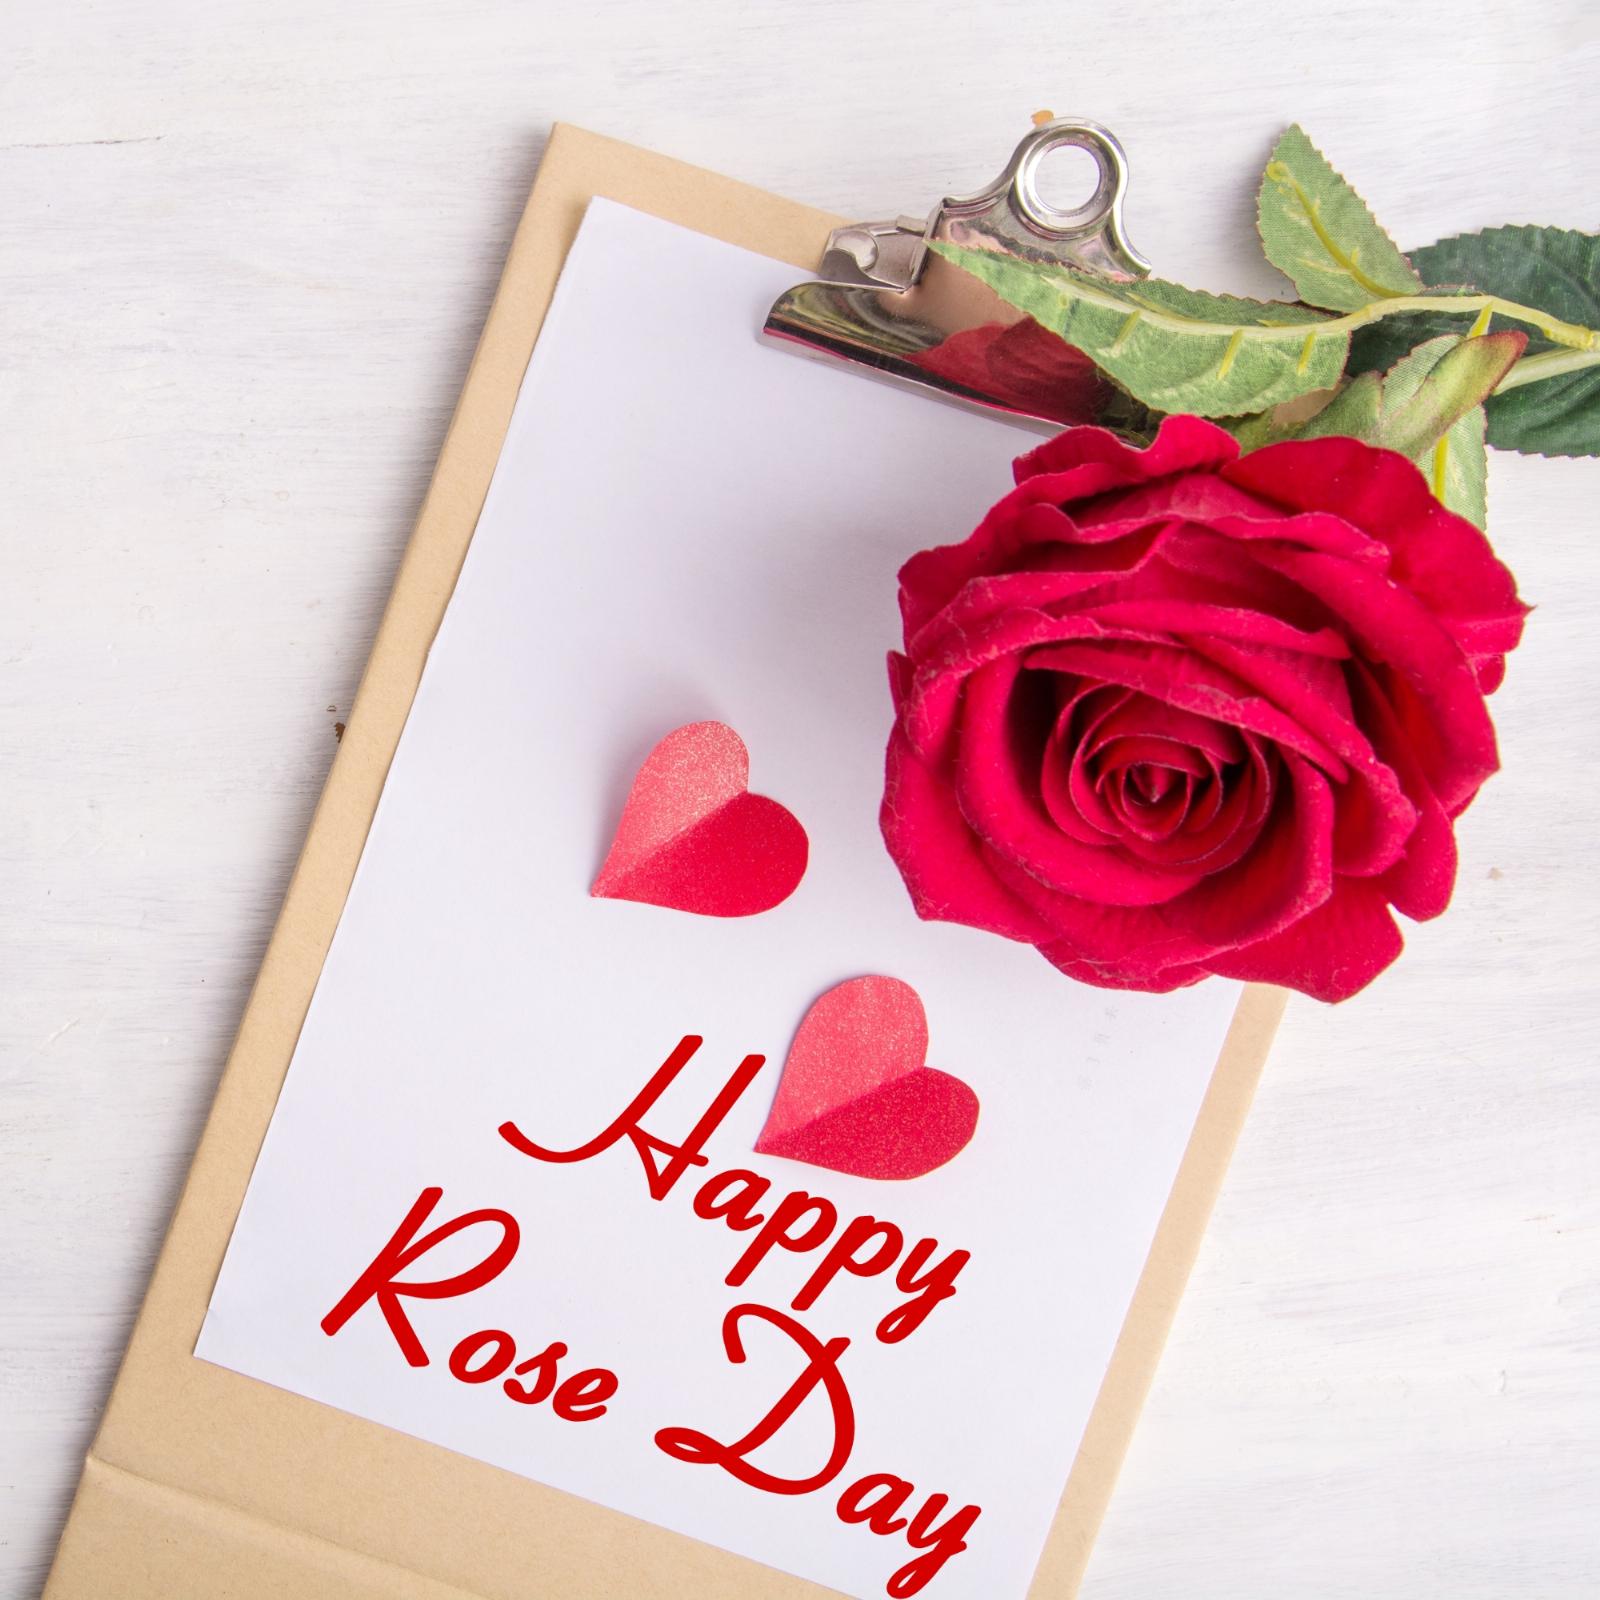 Happy Rose Day Wishes Images